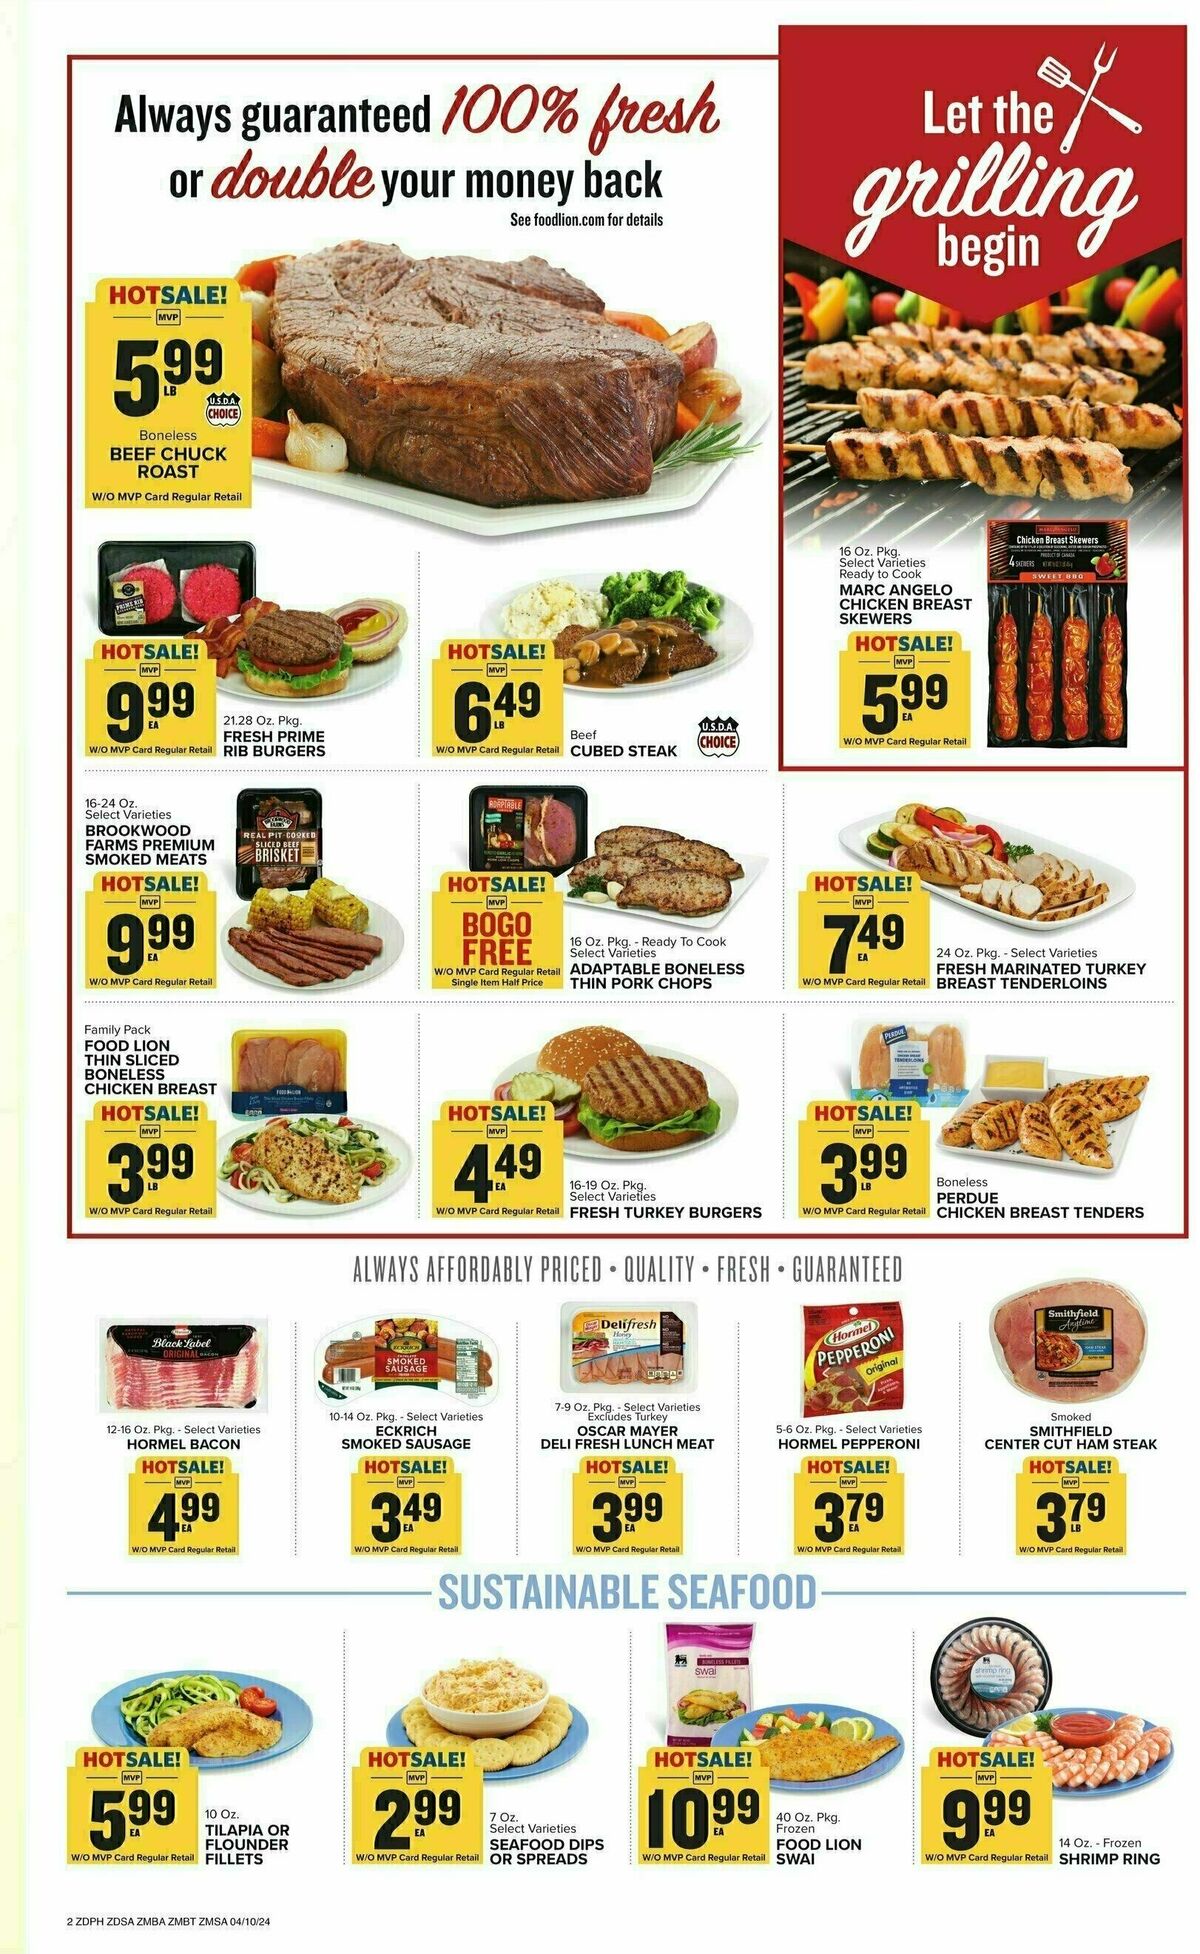 Food Lion Weekly Ad from April 10